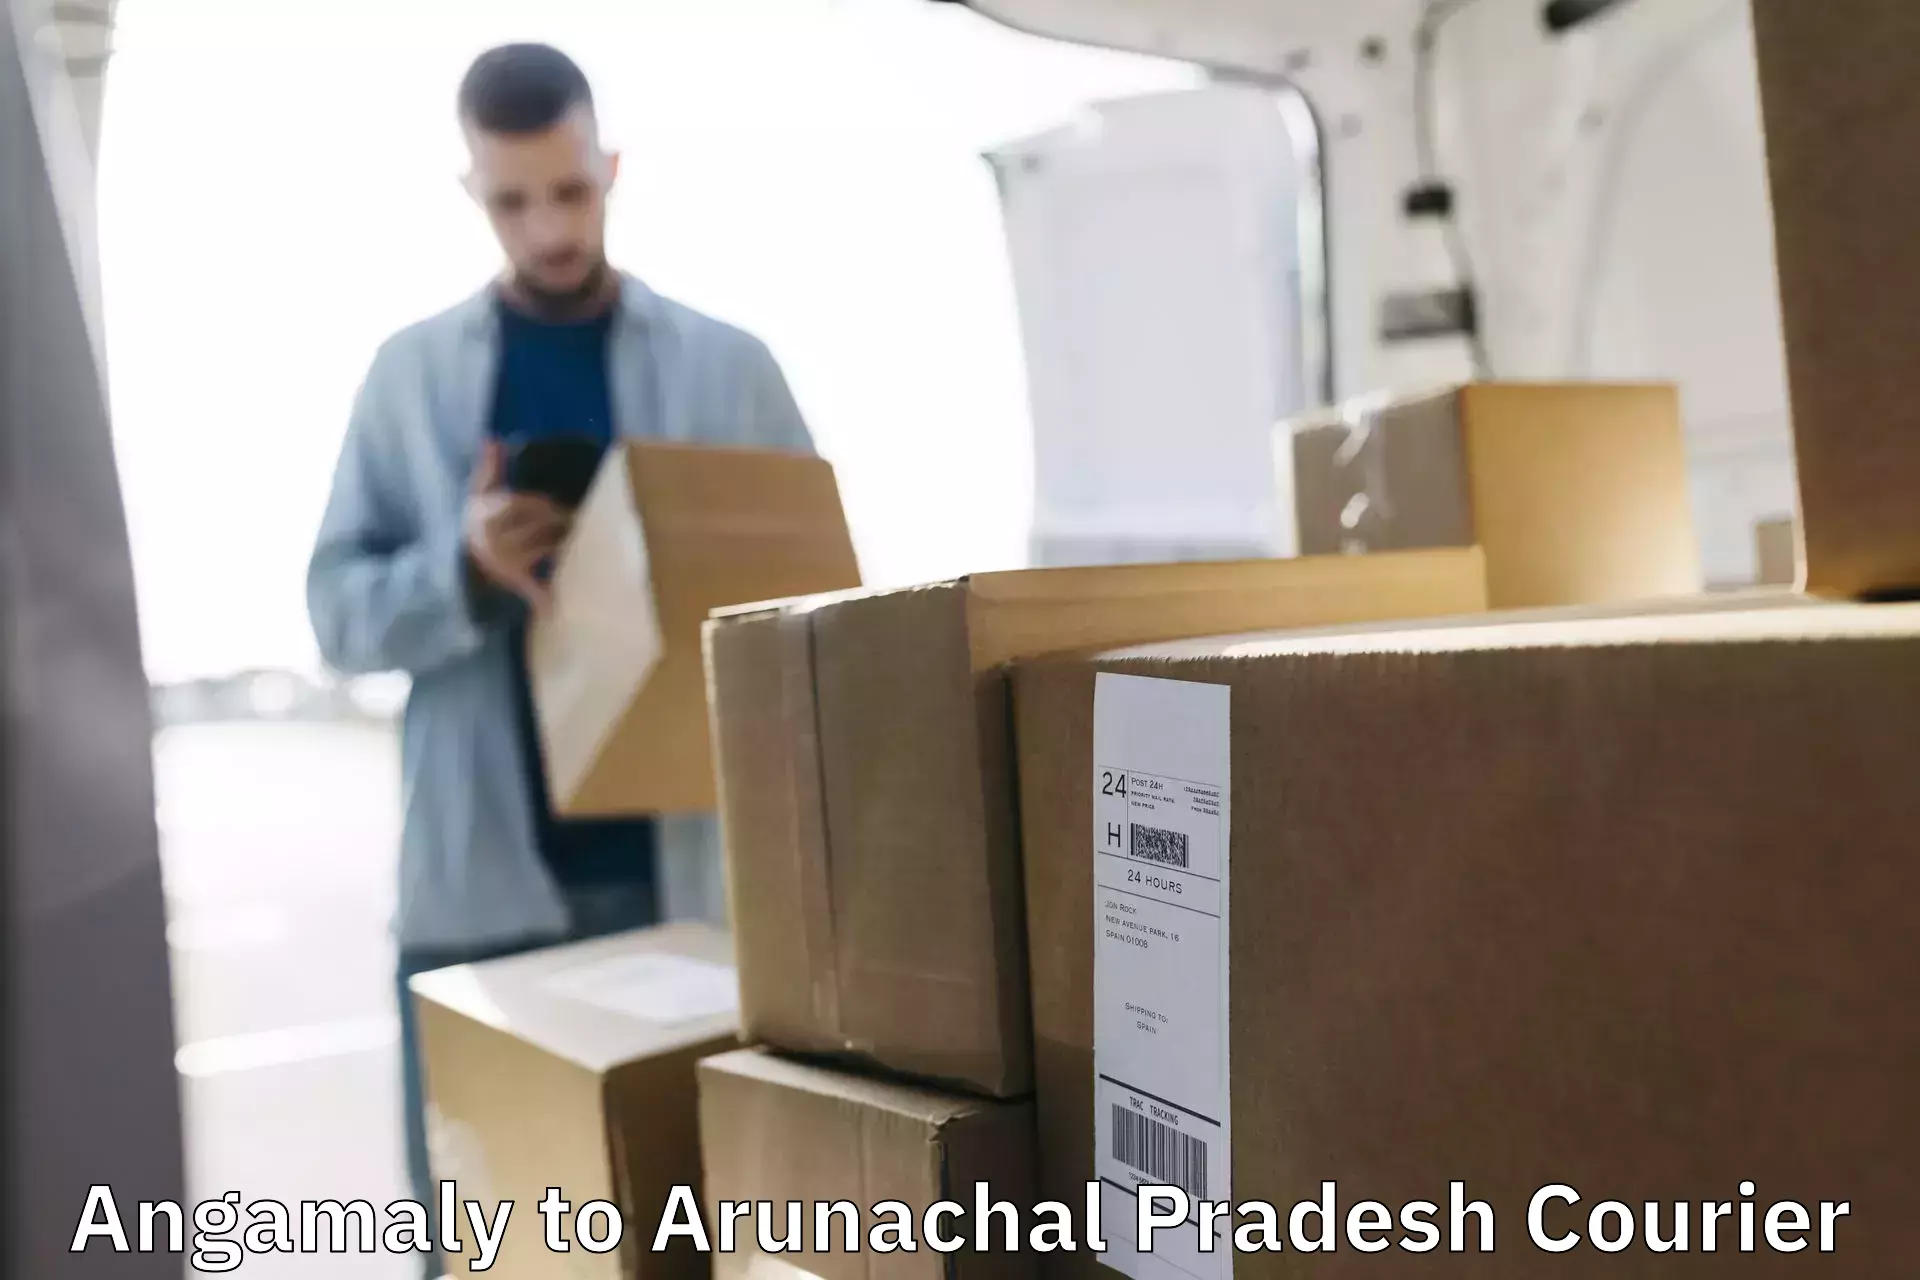 Reliable courier services Angamaly to Arunachal Pradesh